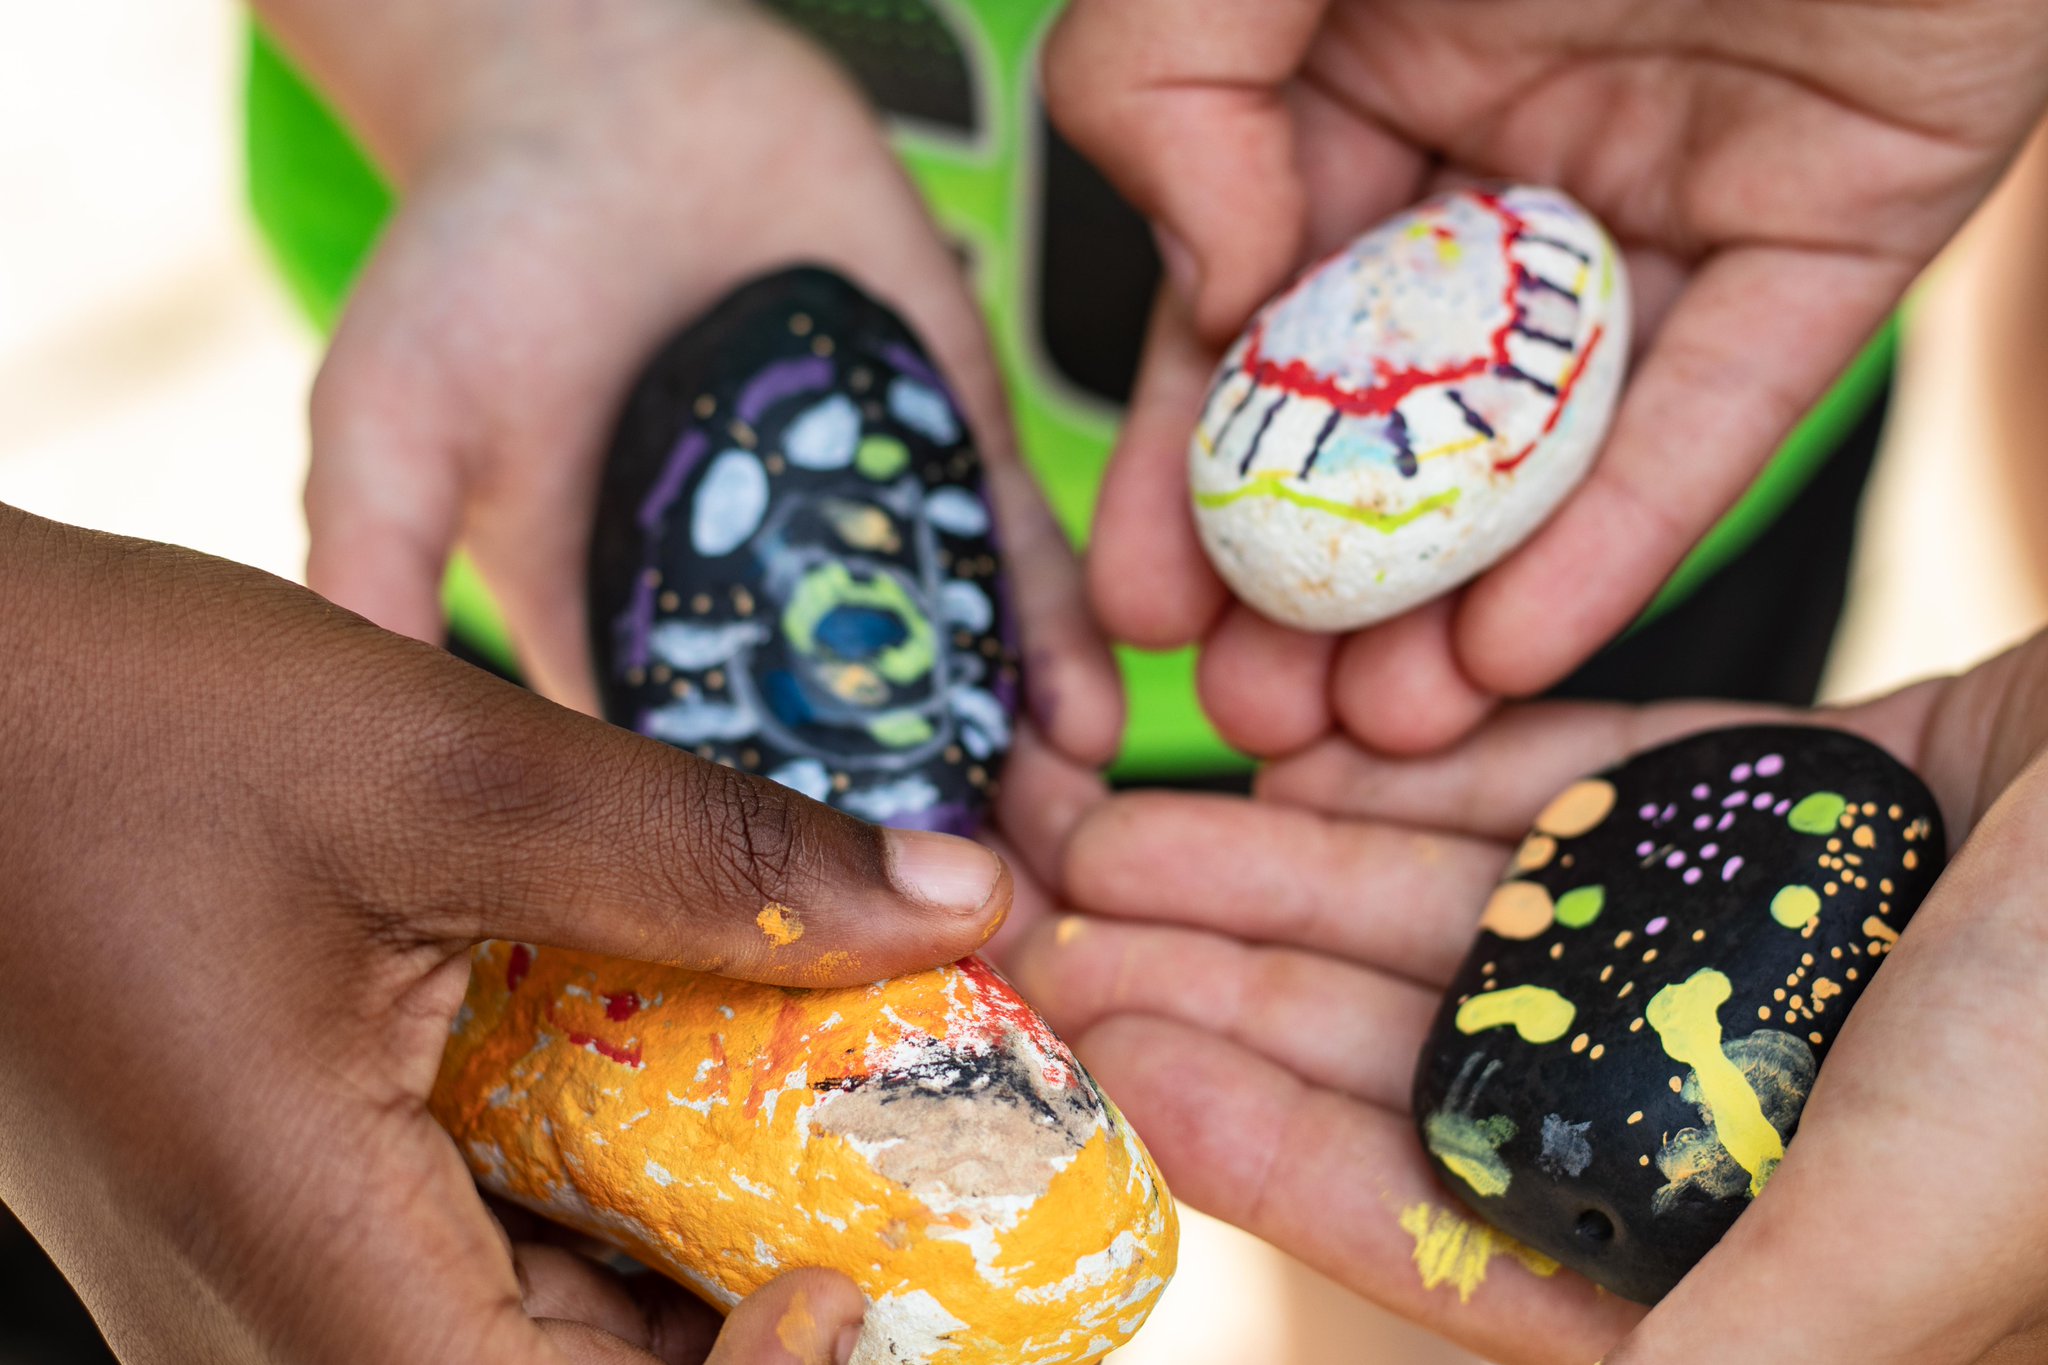 Uzivatel Jcfs Chicago Na Twitteru We Are Delighted By The Creativity Of Our Hinaynee Summer Program Campers And Their Painted Rocks The Rock Painting Is Part Of An Activity Designed To Help